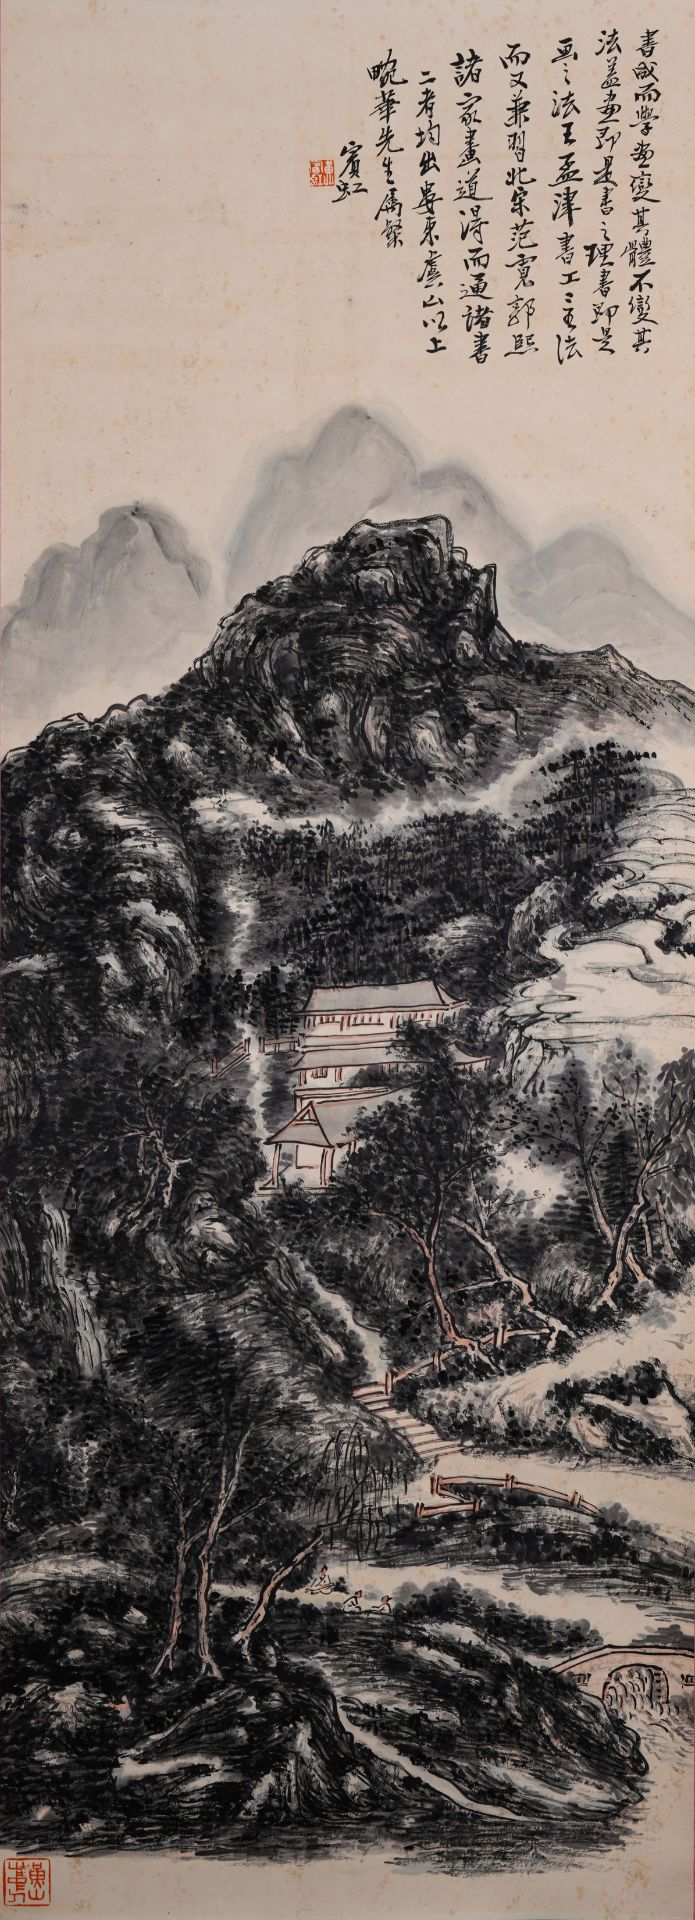 A Chinese Scroll Painting by Huang Binhong - Image 2 of 9